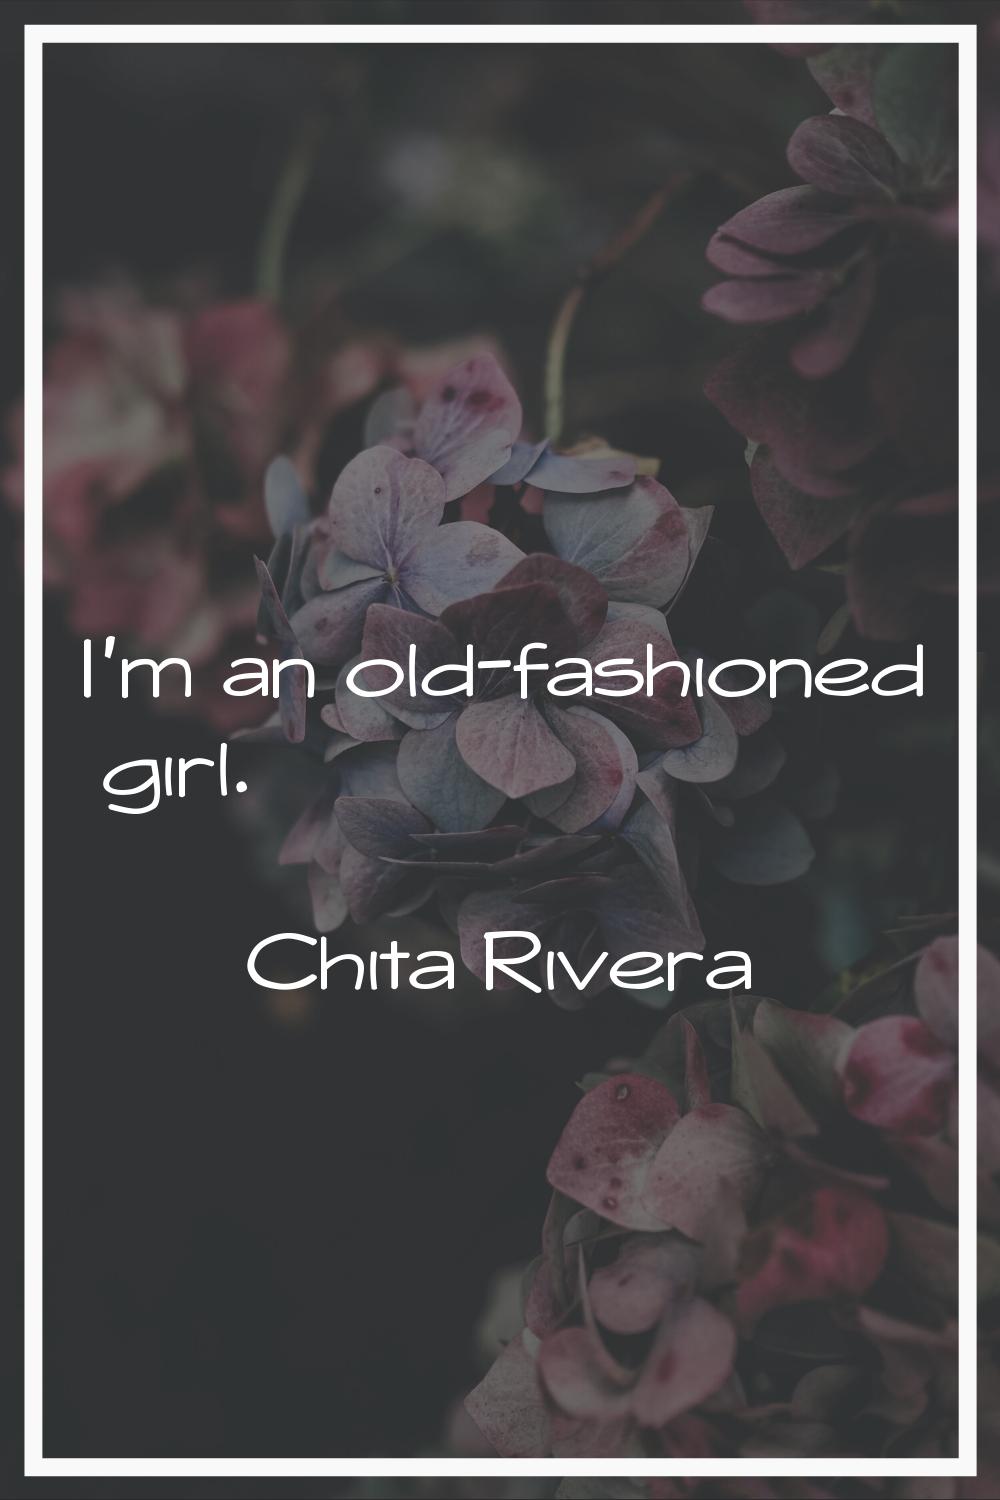 I'm an old-fashioned girl.